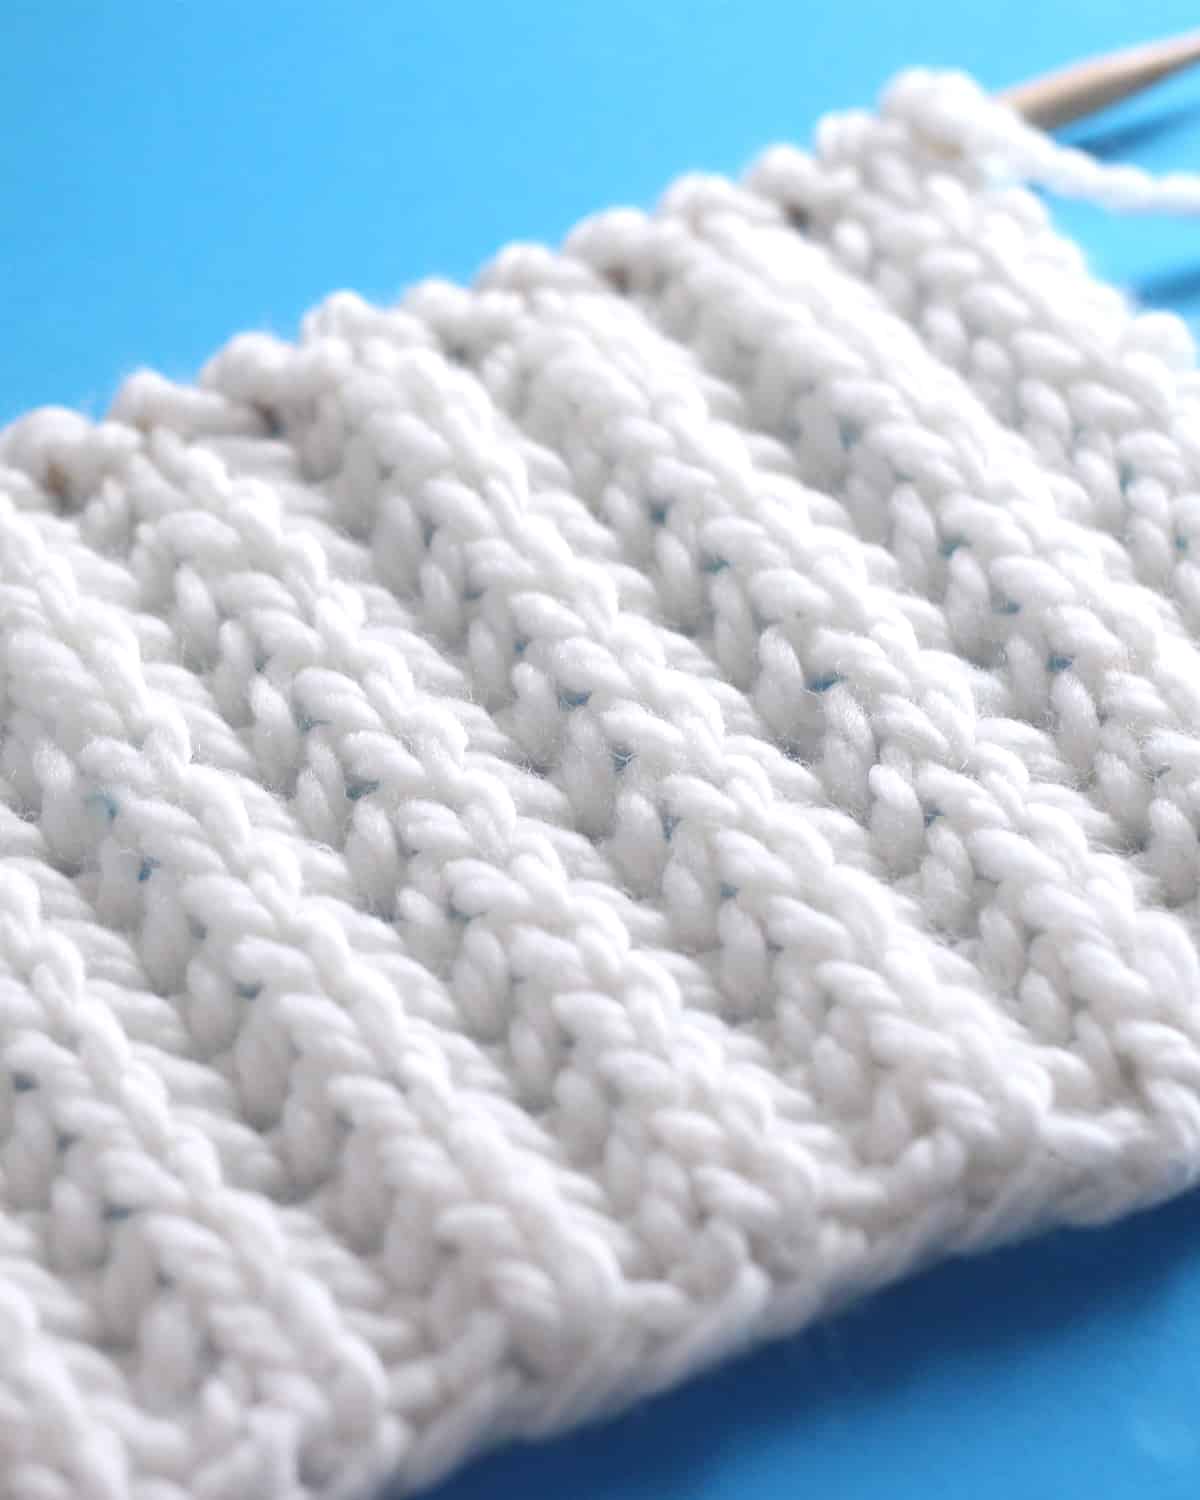 Side view close-up of Fisherman's Rib knit stitch pattern with white color yarn on on a wooden bamboo knitting needle.